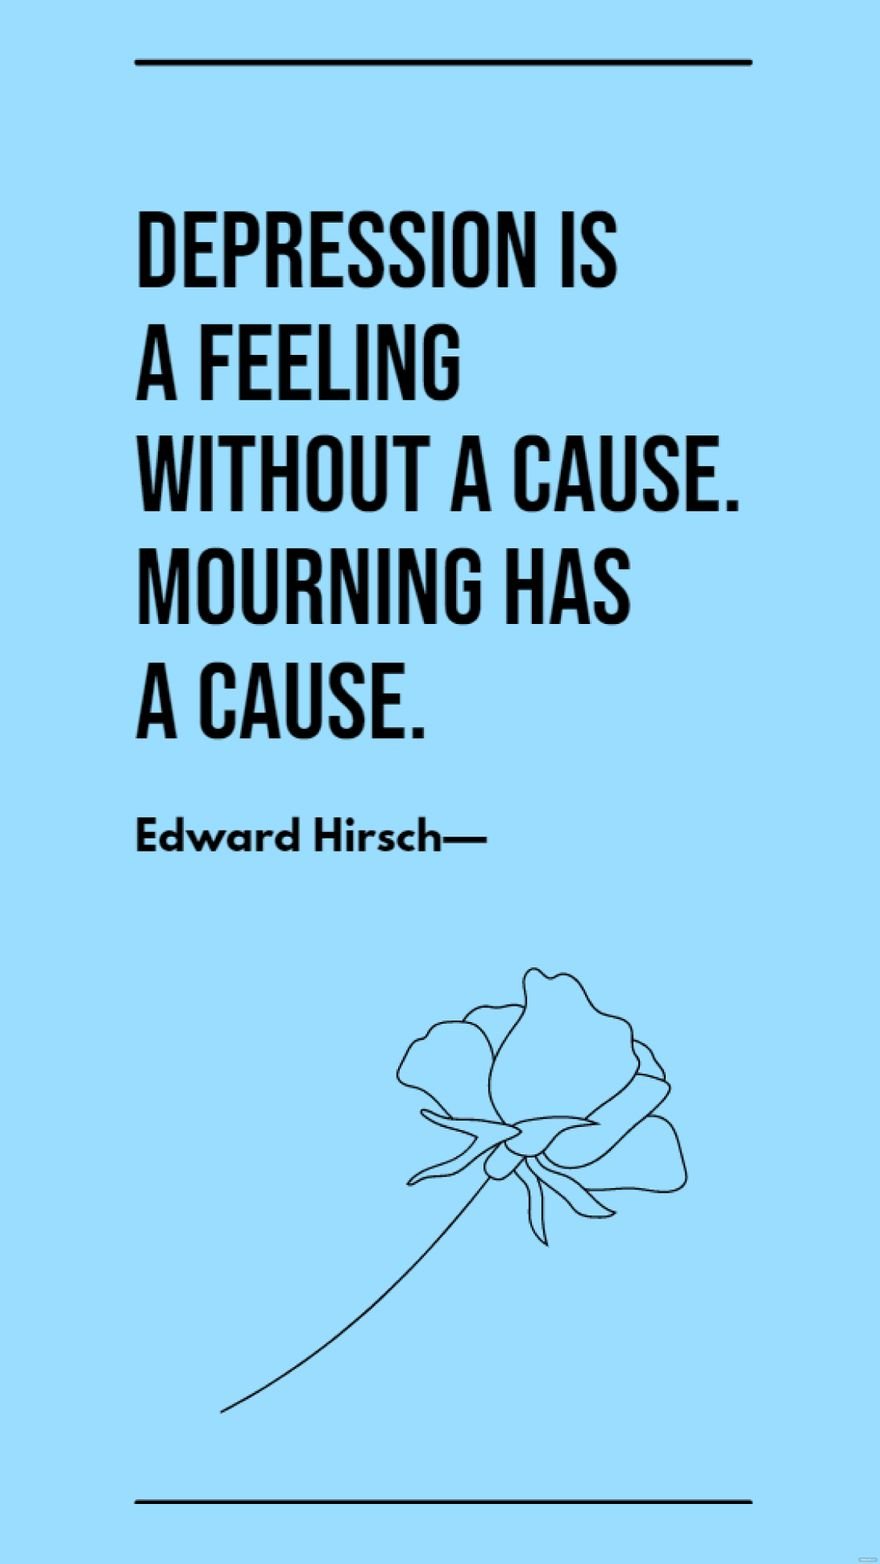 Edward Hirsch  Depression is a feeling without a cause Mourning has a cause